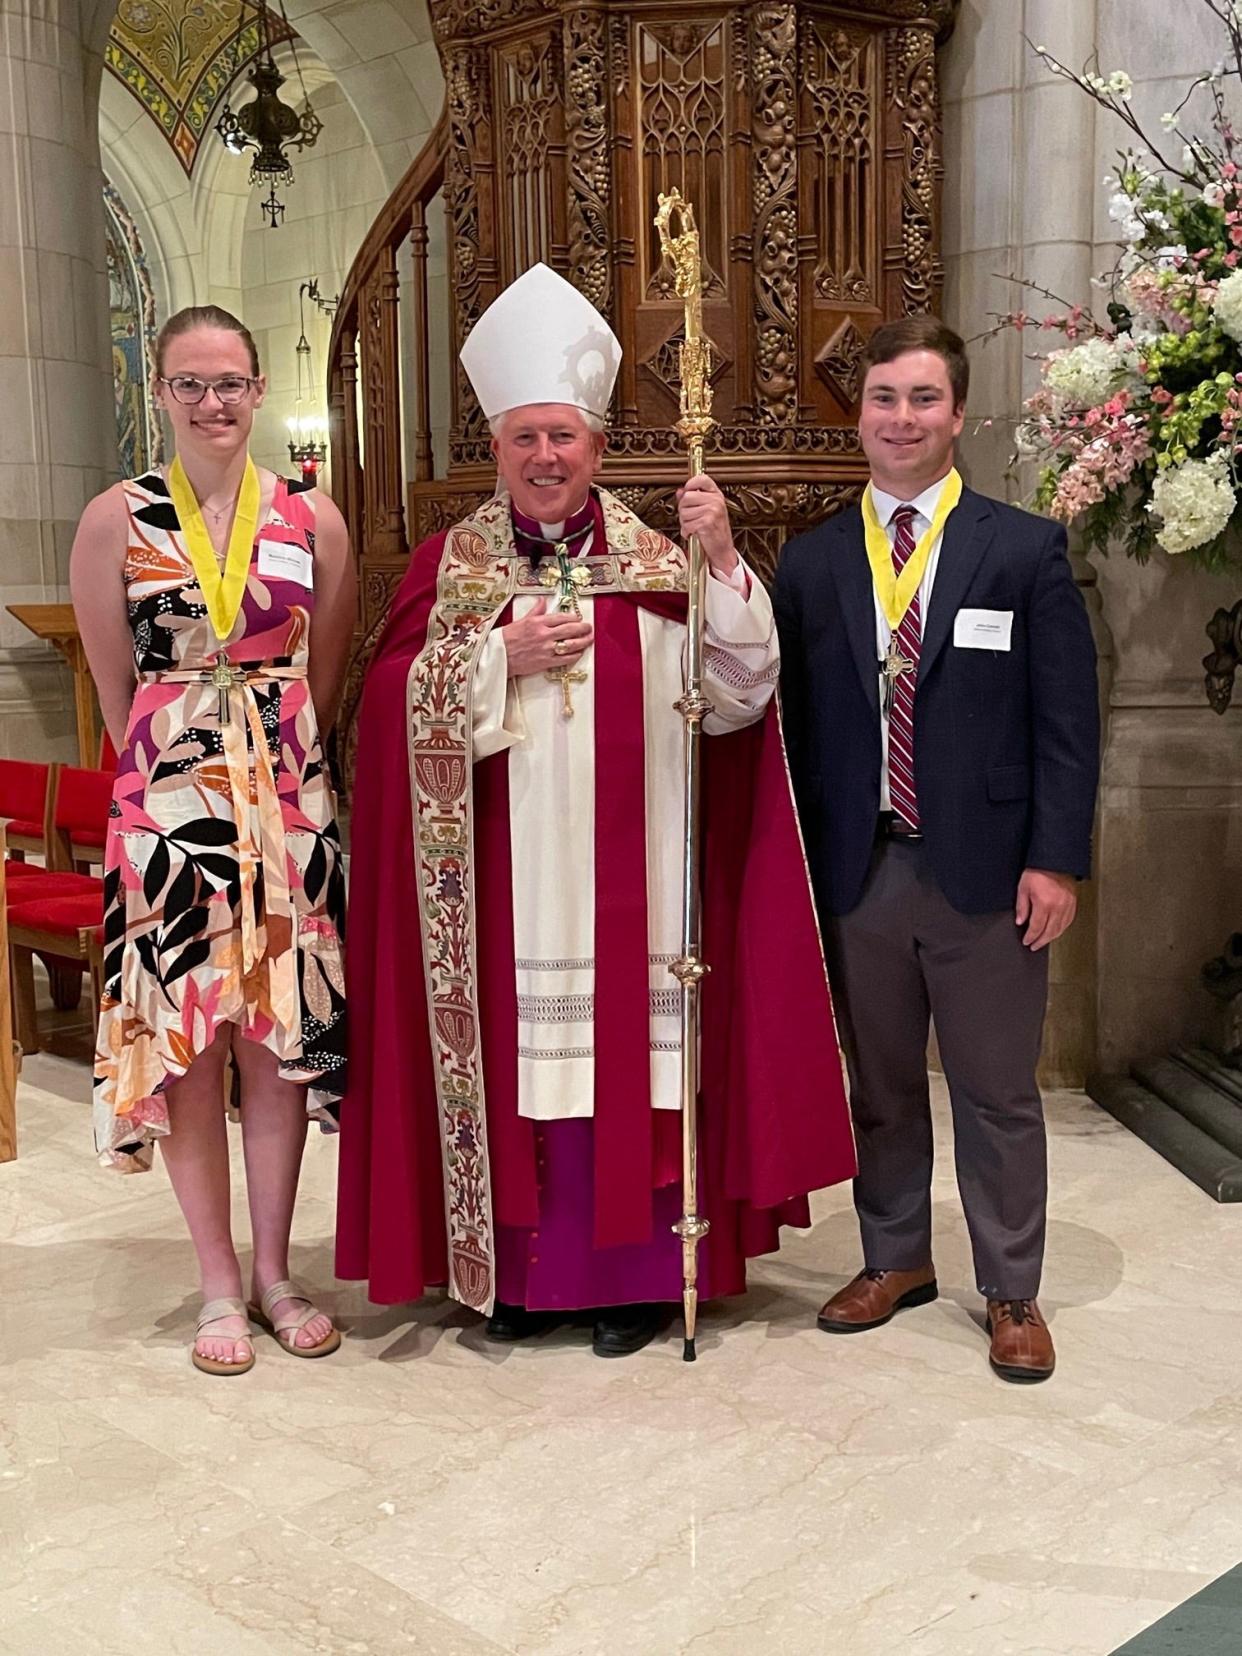 St. Joseph Central Catholic awarded the Bishop's Cross award to Madeline Michael and John Connell.